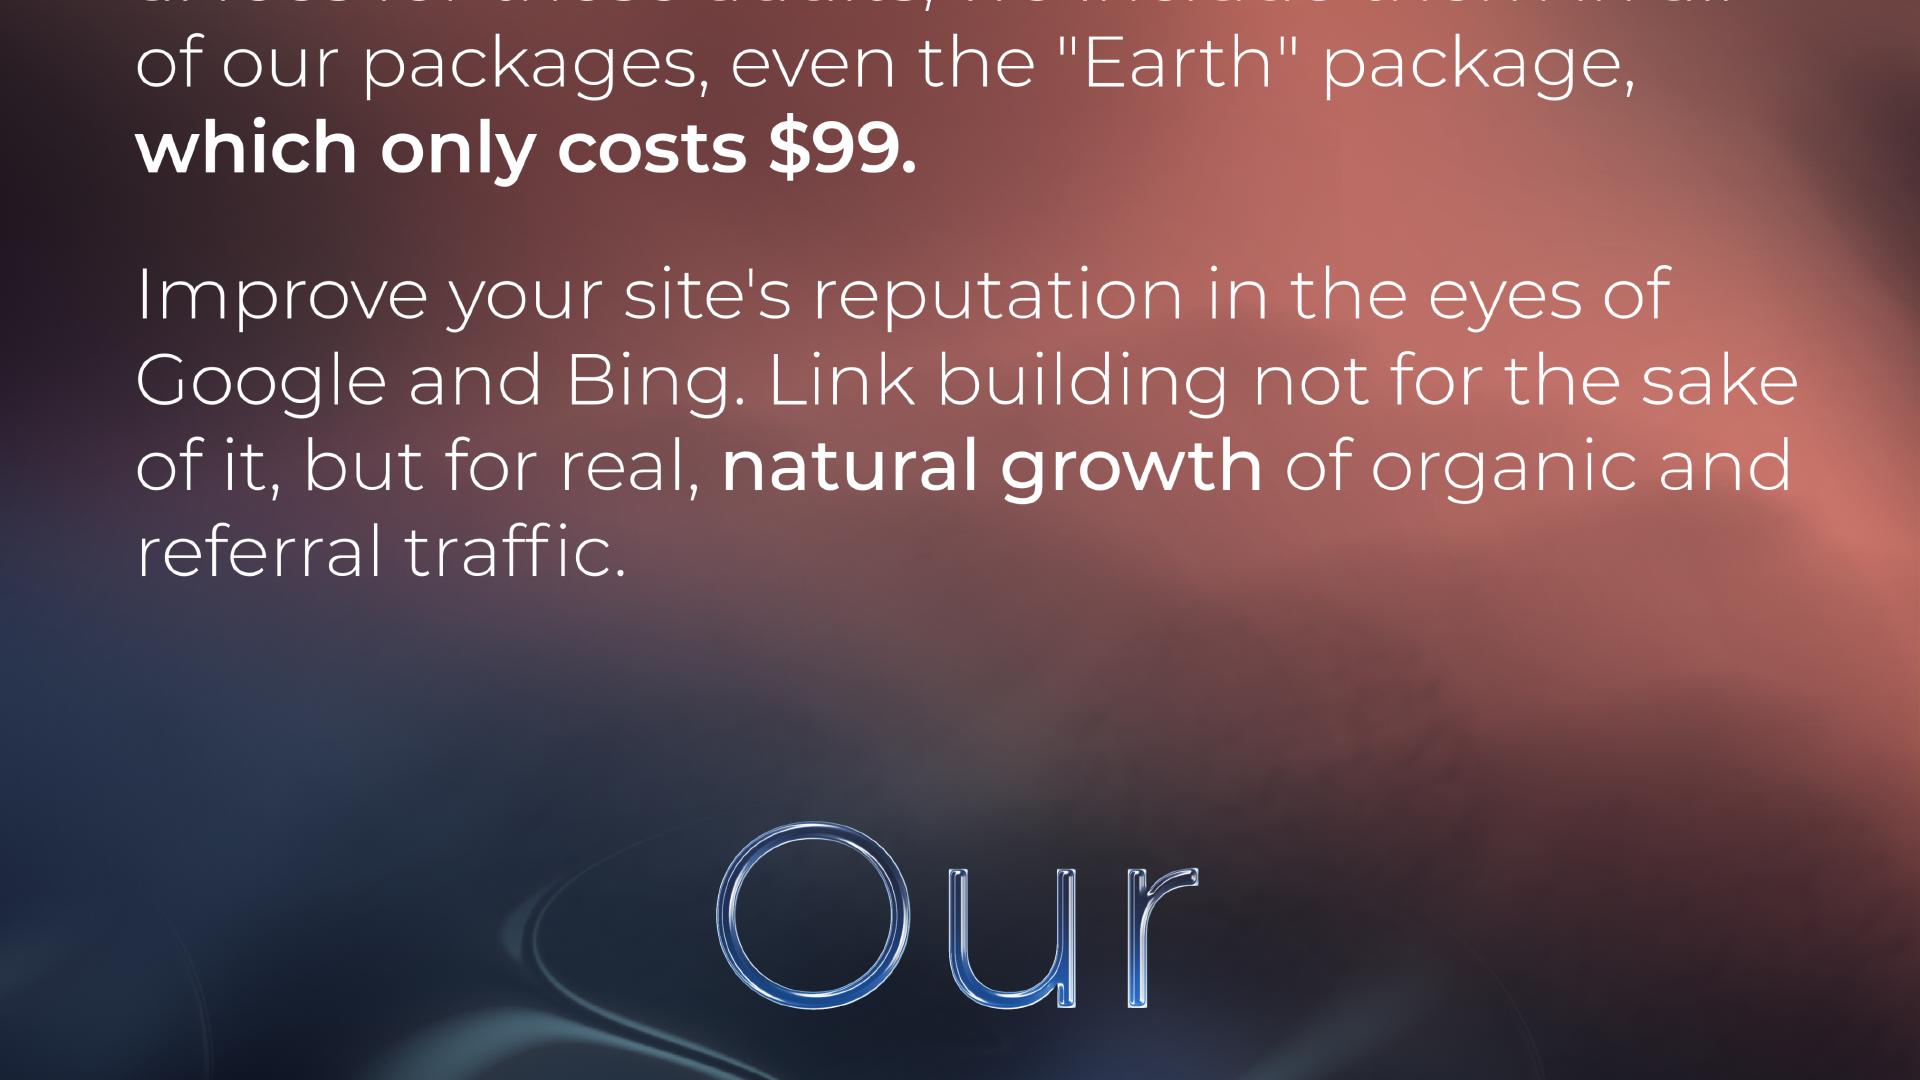 ... of our packages, even the 'Earth' package, which only costs $99. Improve your site's reputation in the eyes of Google and Bing. Link building not for the sake of it, but for real, natural growth of organic and referral traffic. Our ...